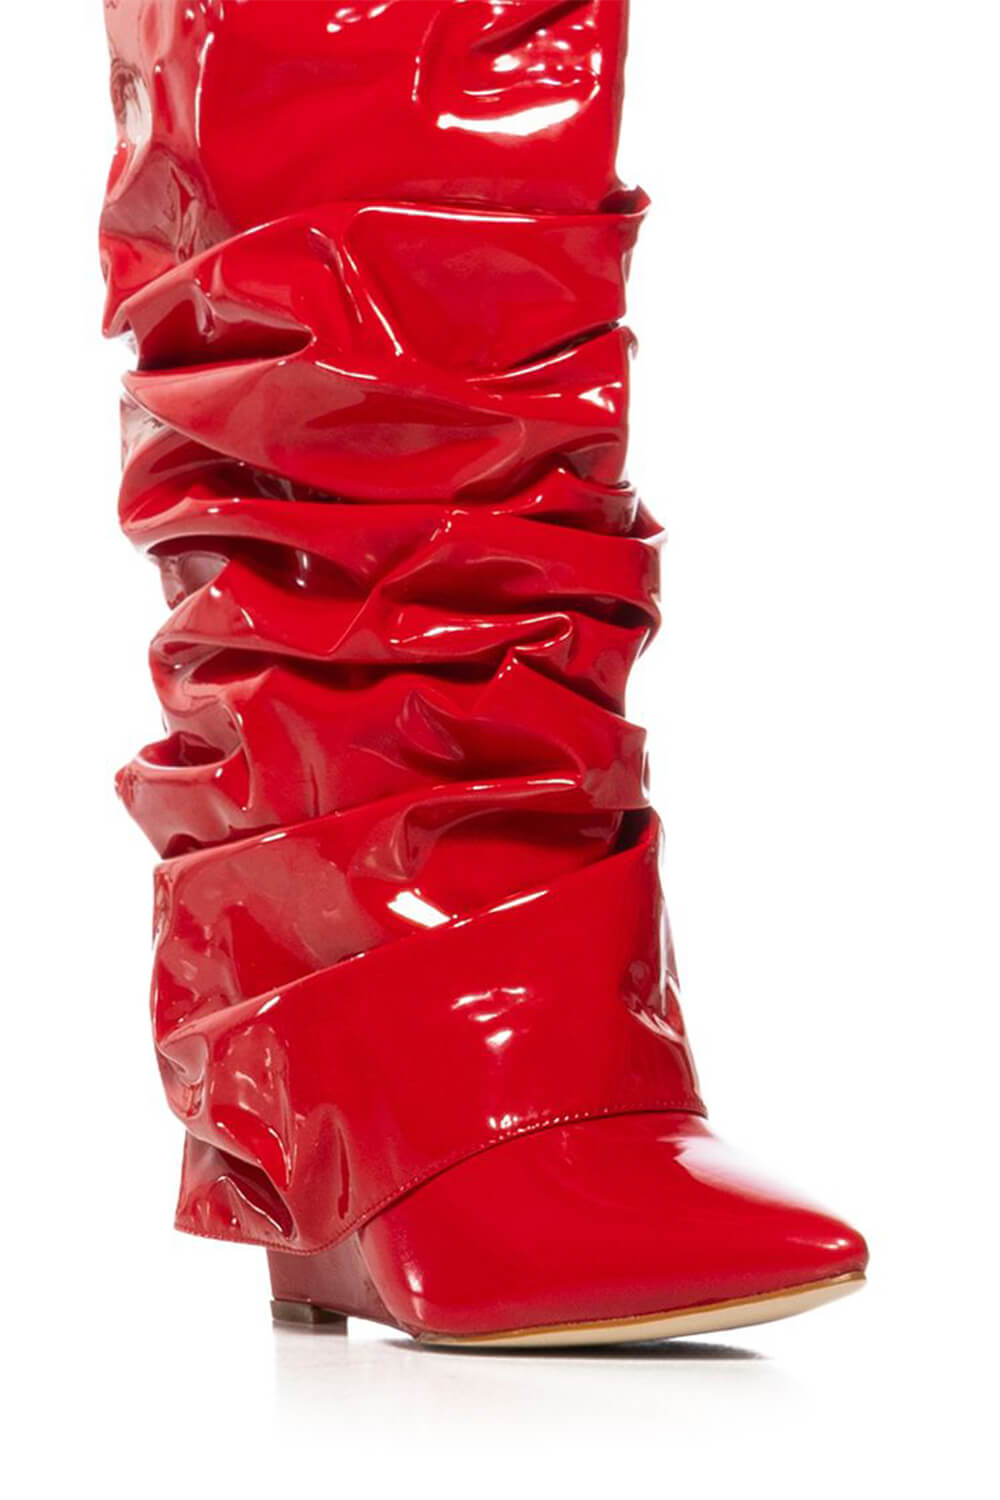 Patent Scrunched Foldover Mid Calf Wedge Heel Boots - Red